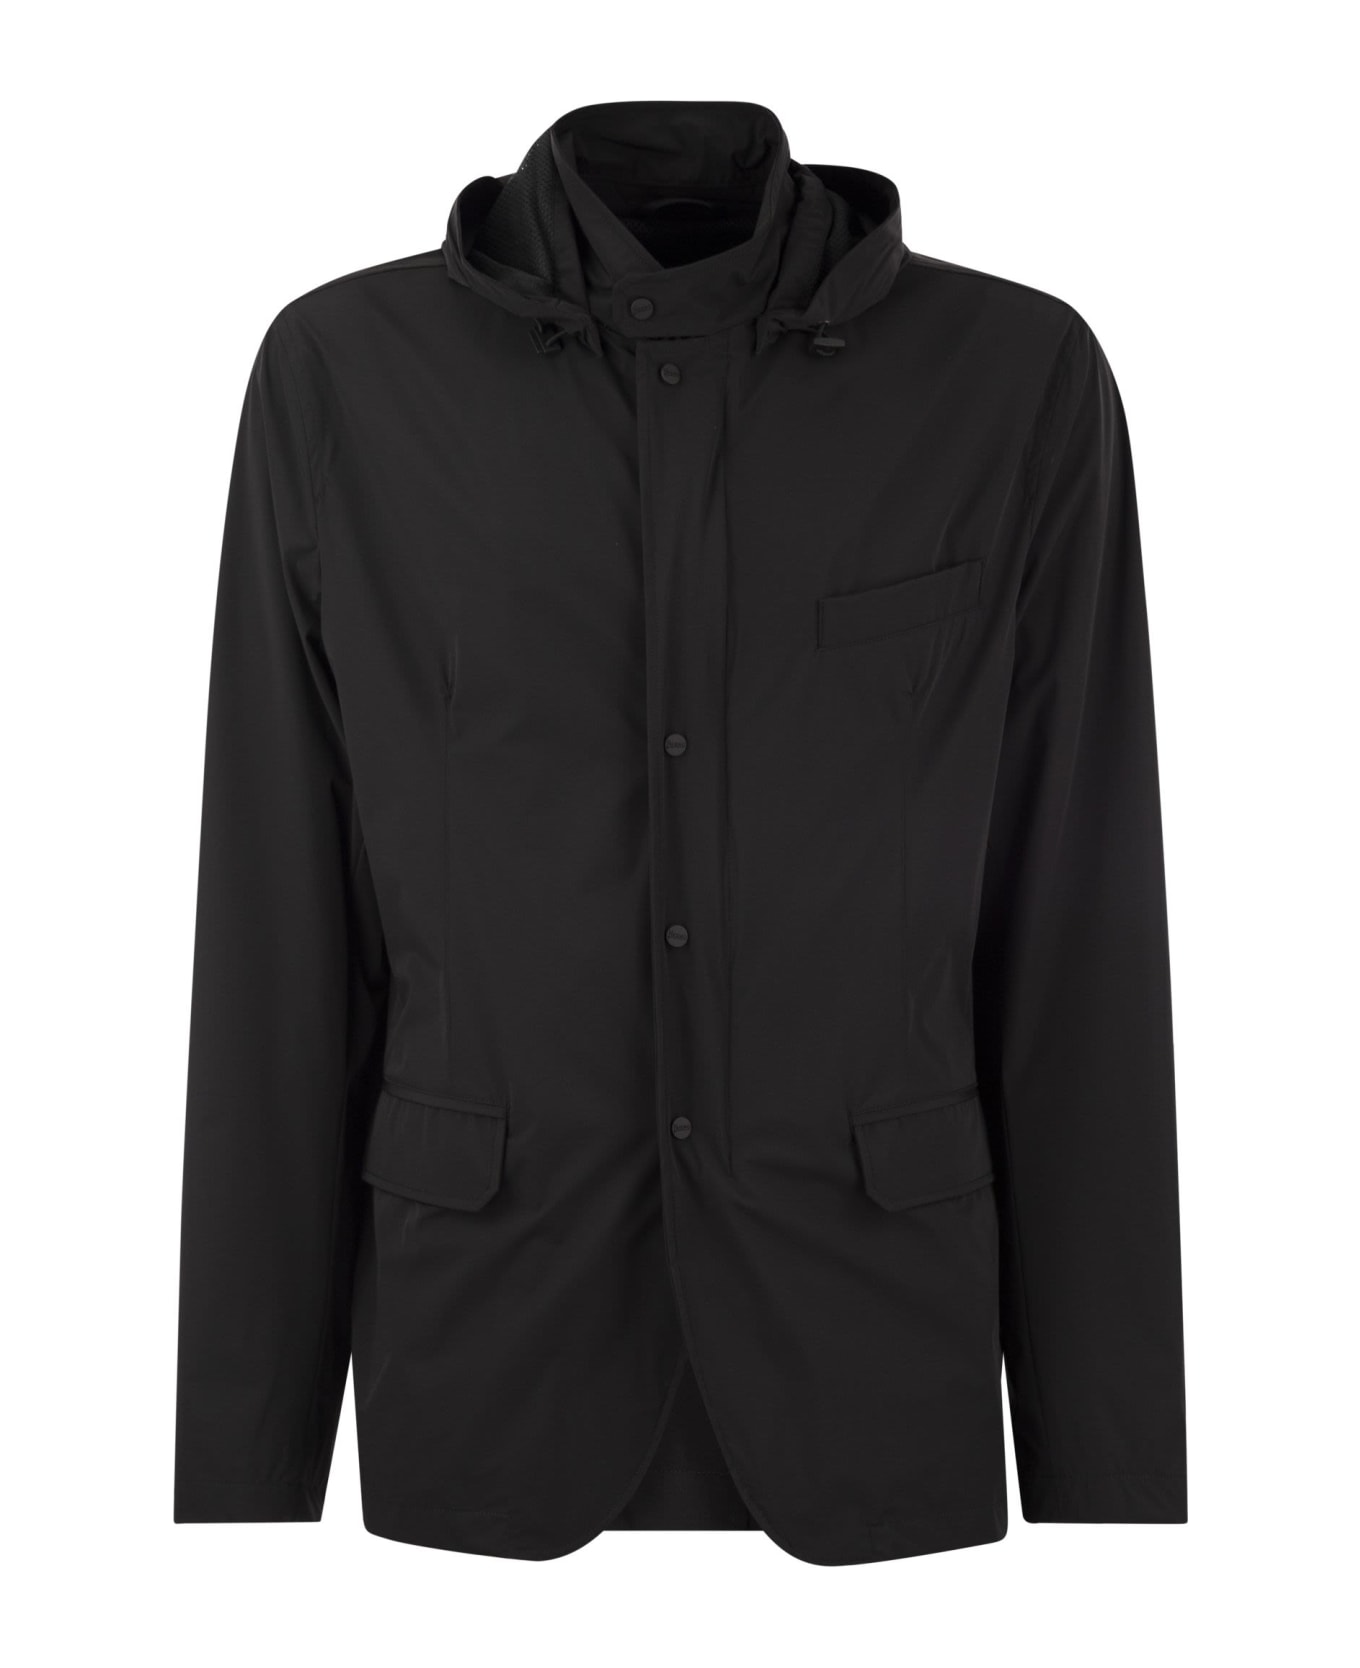 Herno Technical Fabric Jacket With Hood - Black